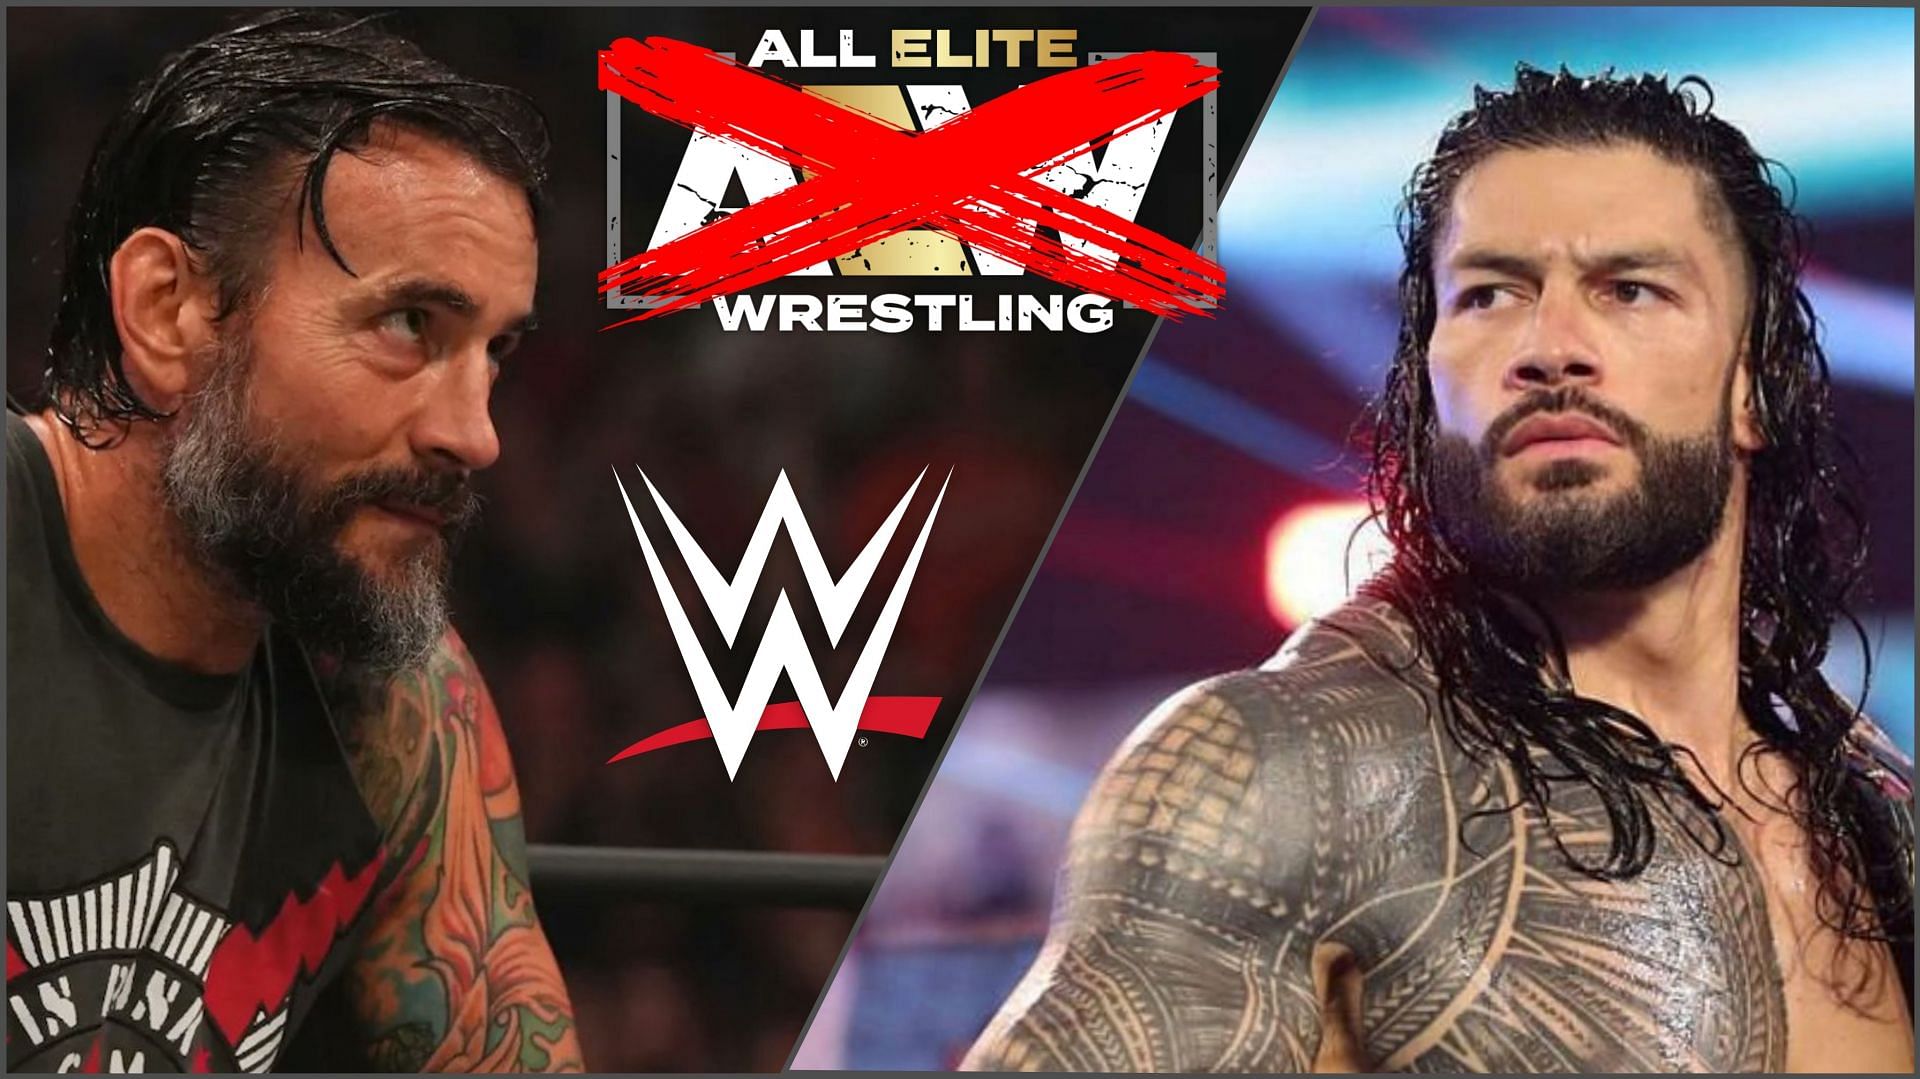 Could WWE be the next stop for CM Punk?